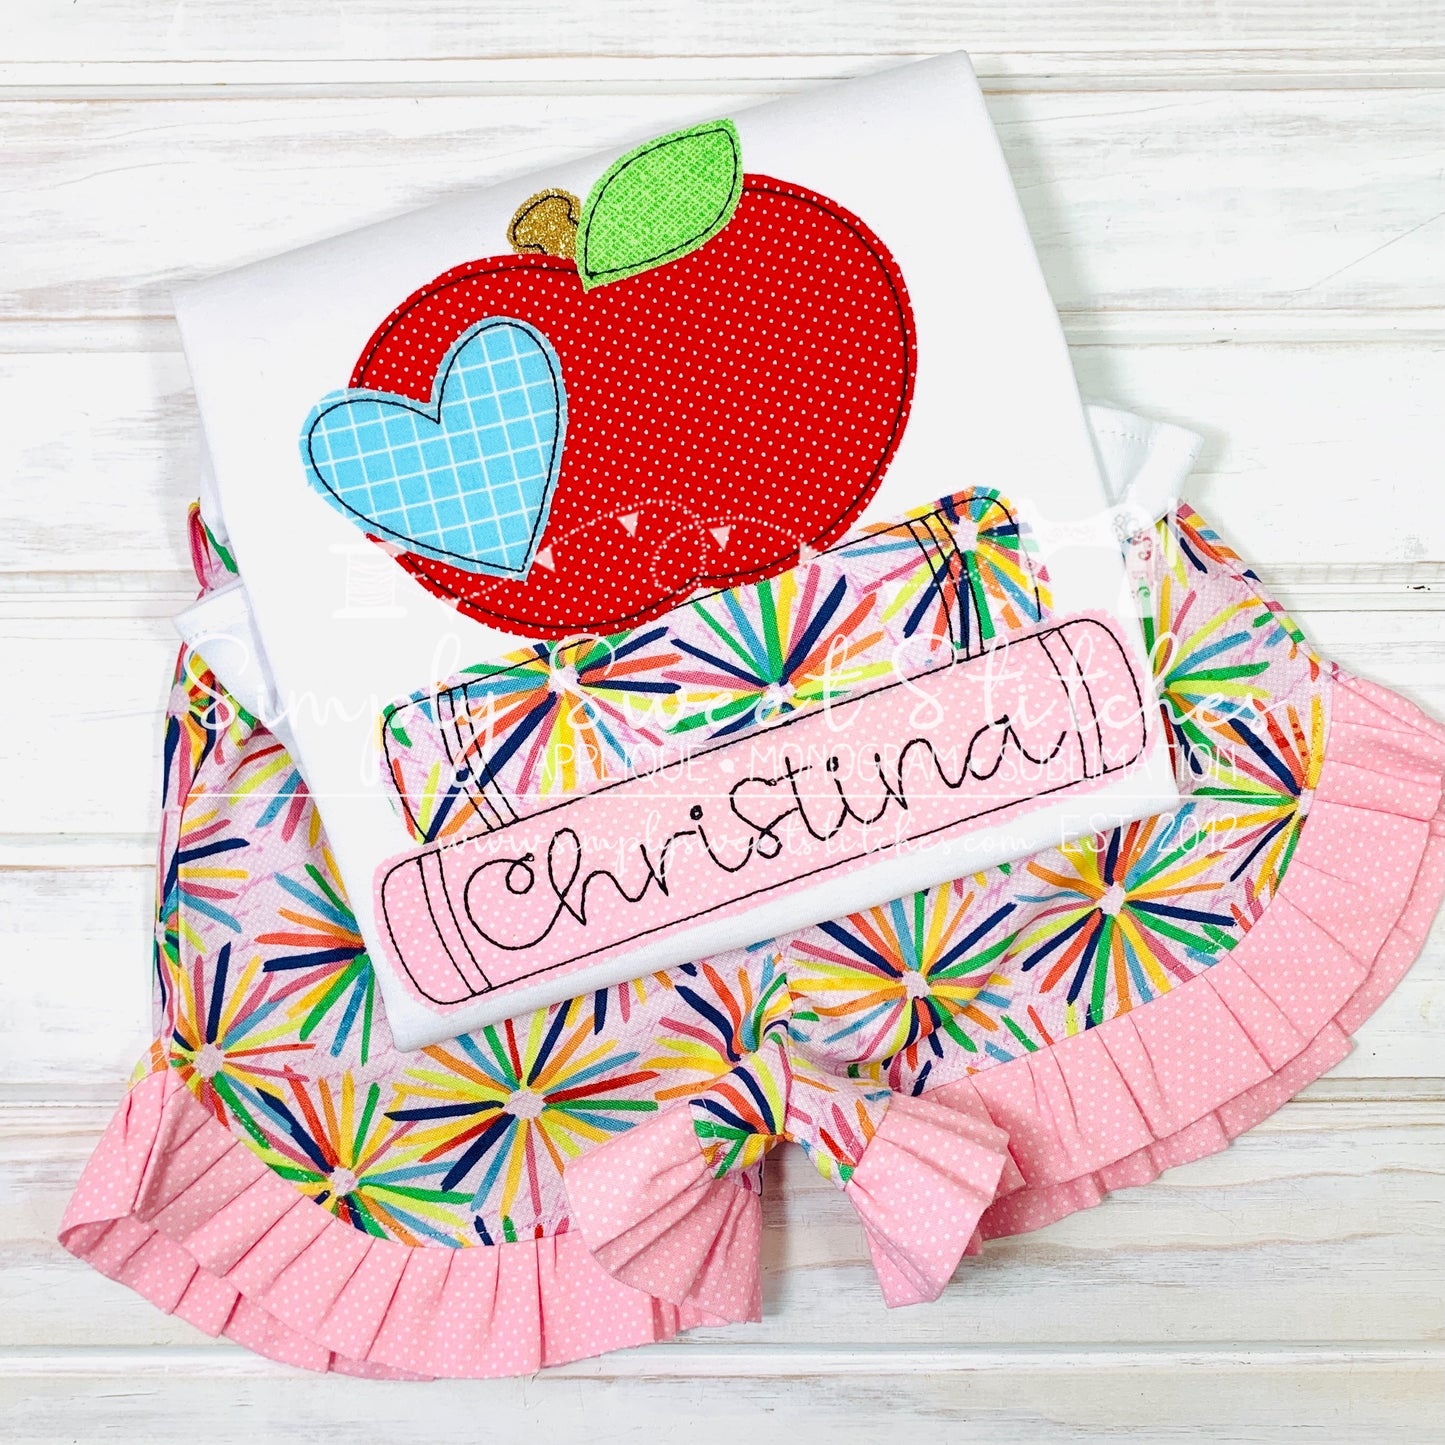 2555 - APPLE WITH HEART STACKED BOOKS - CHILD SHIRT